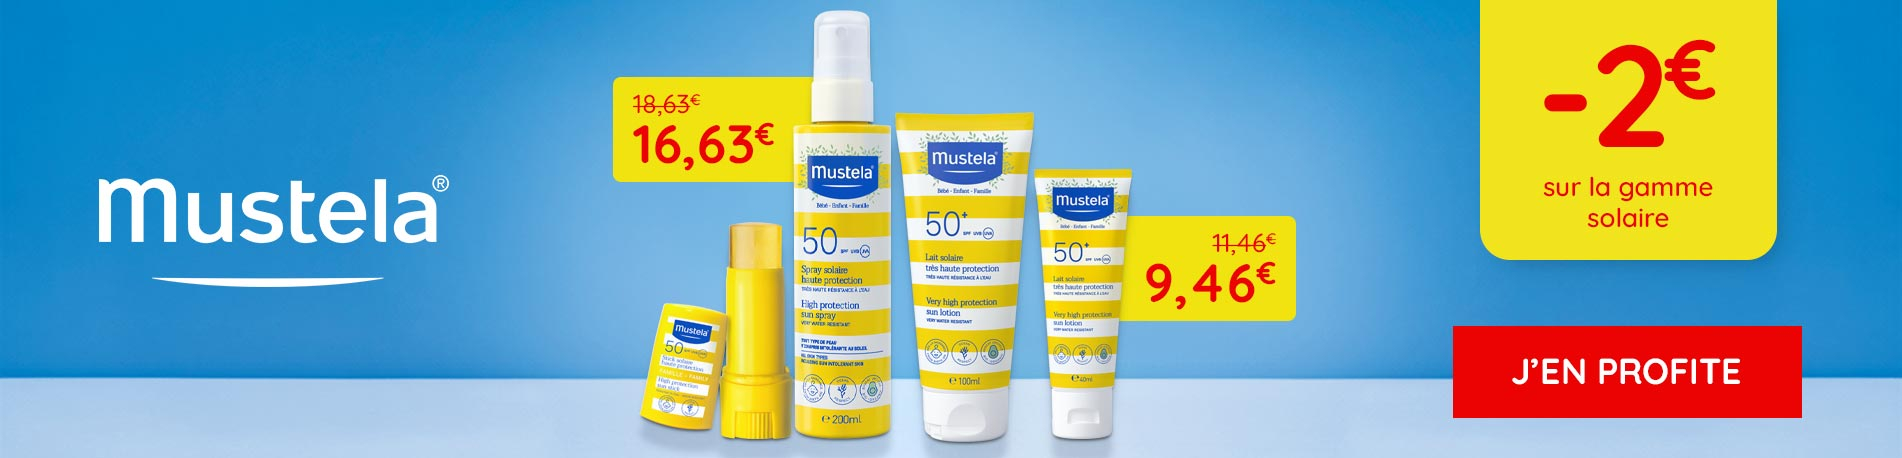 Promotion Mustela solaires